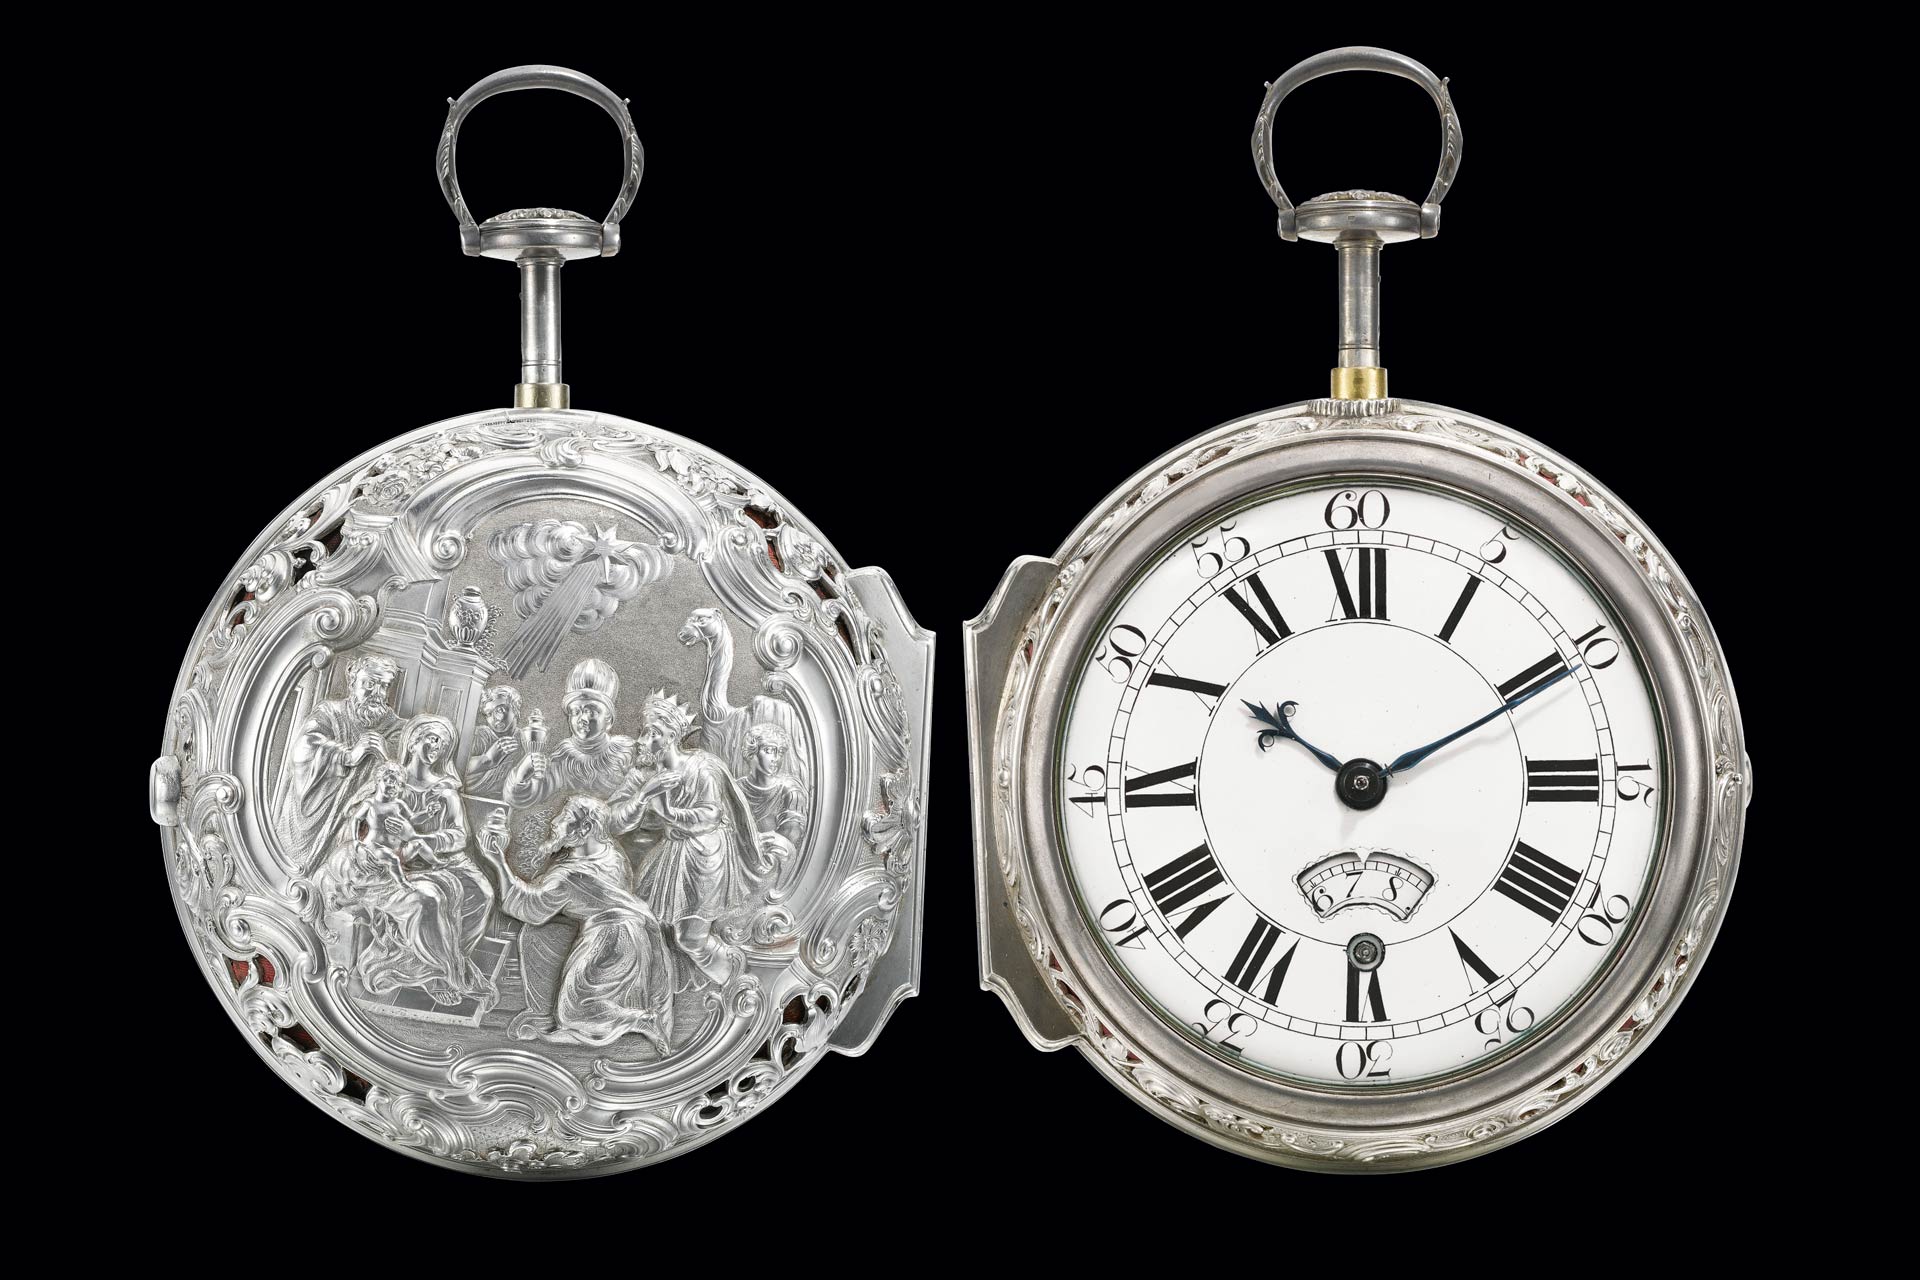 Lot 23: Walter Partrige, London A MAGNIFICENT, VERY RARE AND MASSIVE SILVER TRIPLE CASED TWO TRAIN HALF QUARTER REPEATING REPOUSSE COACH WATCH WITH ALARM 1756